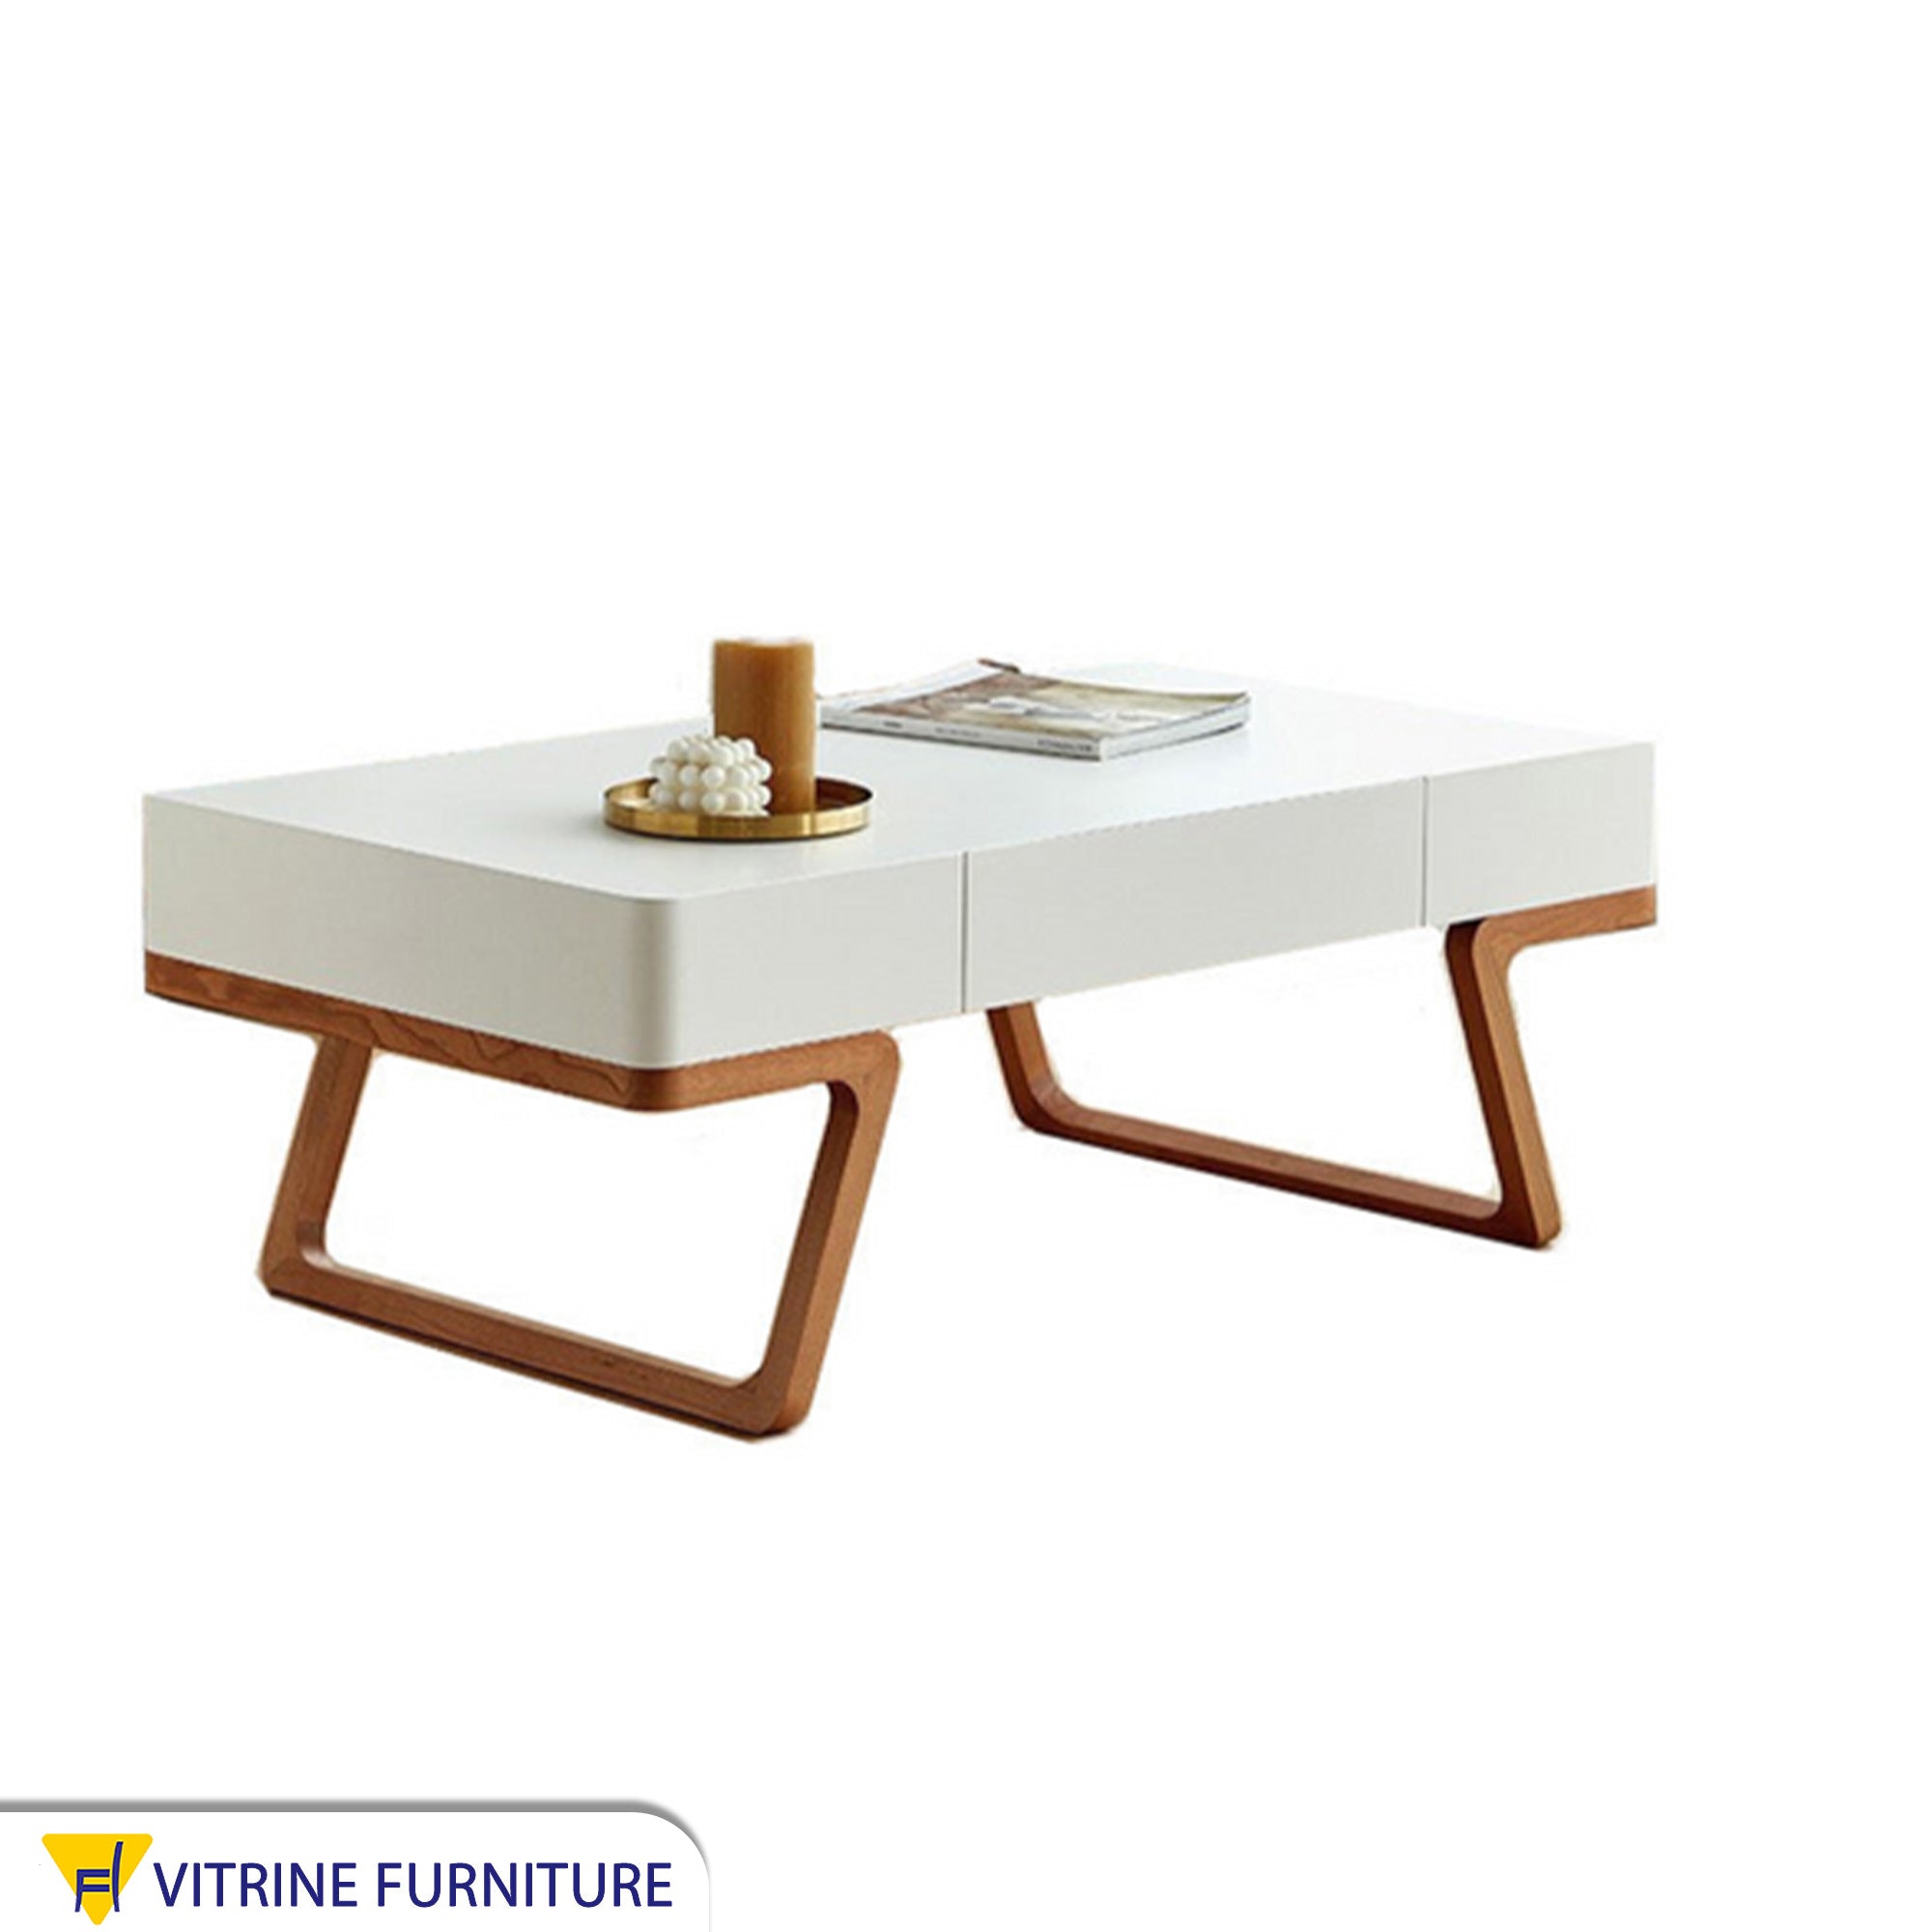 Coffee table with slanted legs